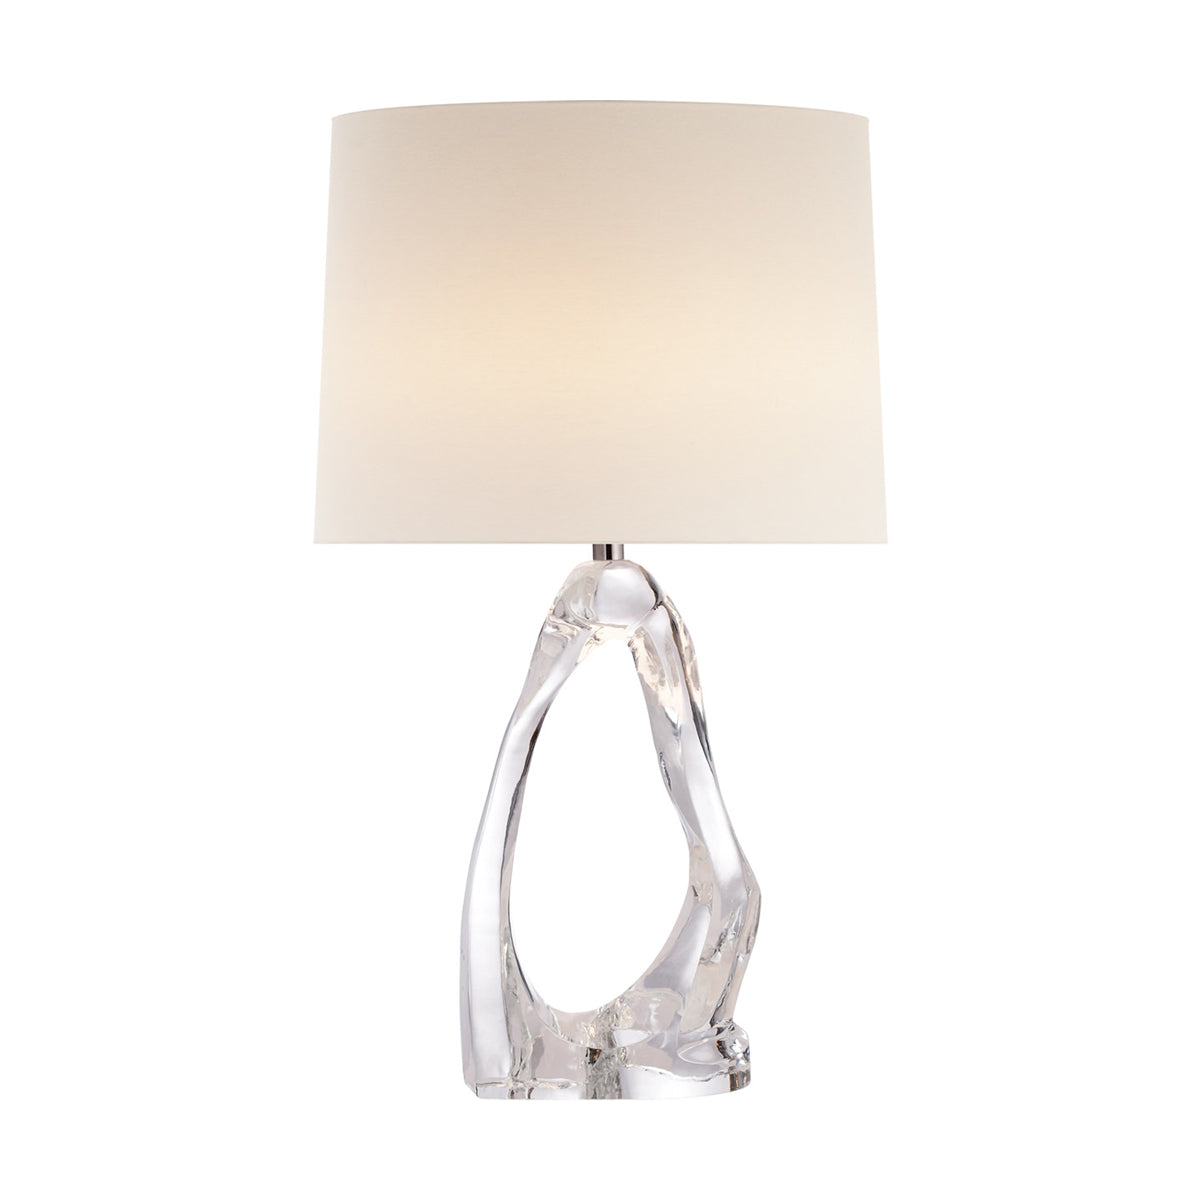 CANNES TABLE LAMP